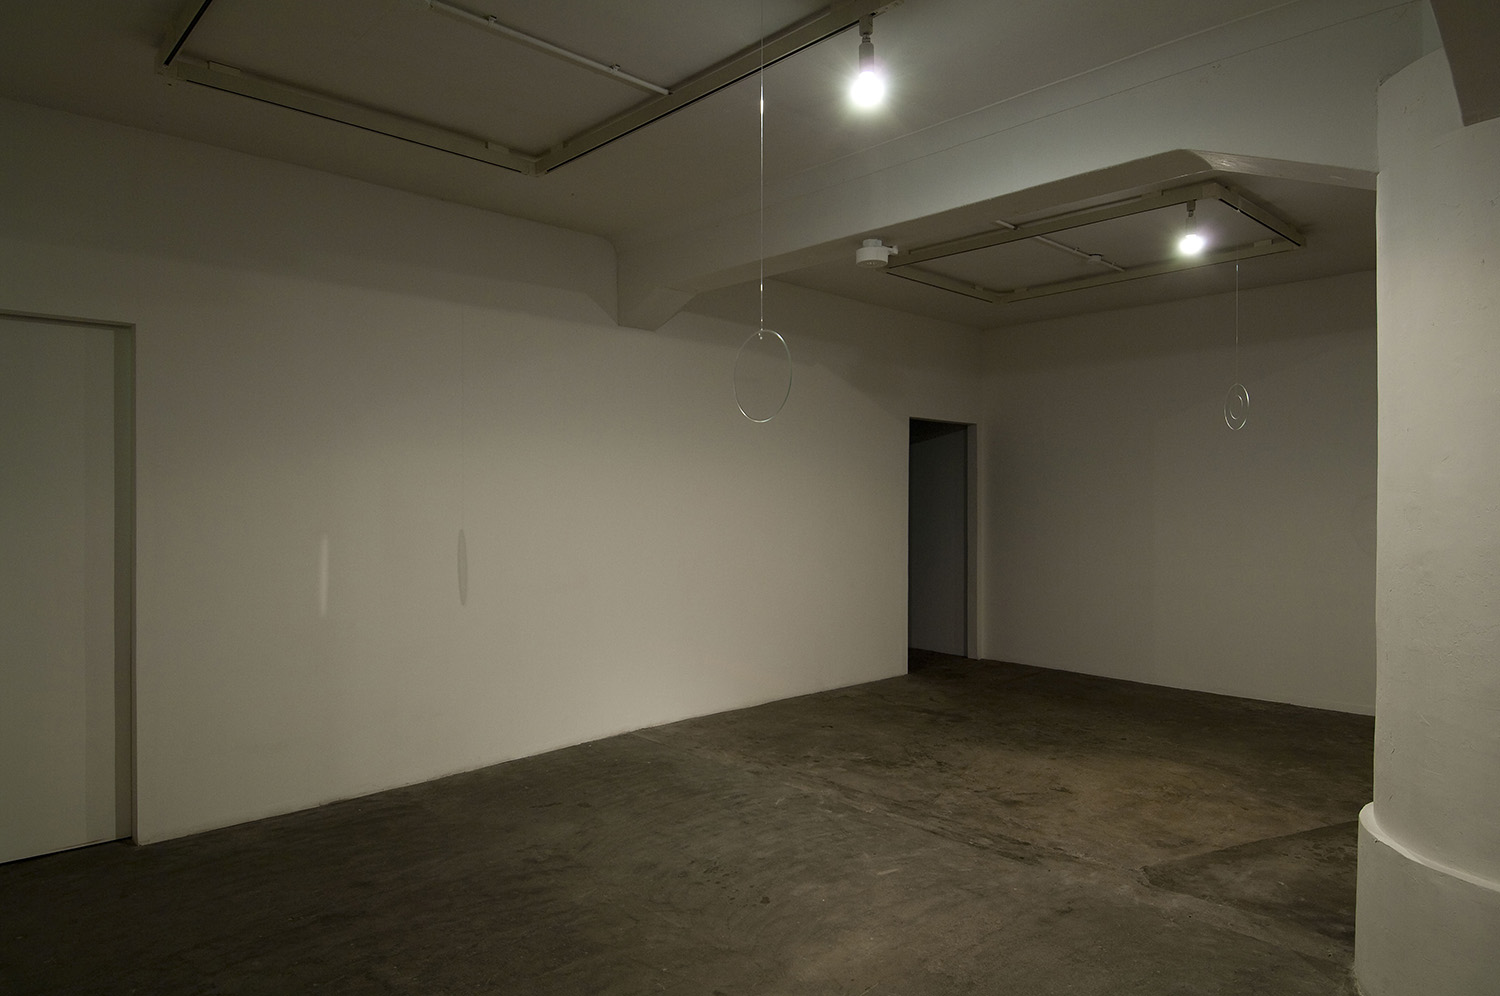 Installation View of one-man exhibition in 2009